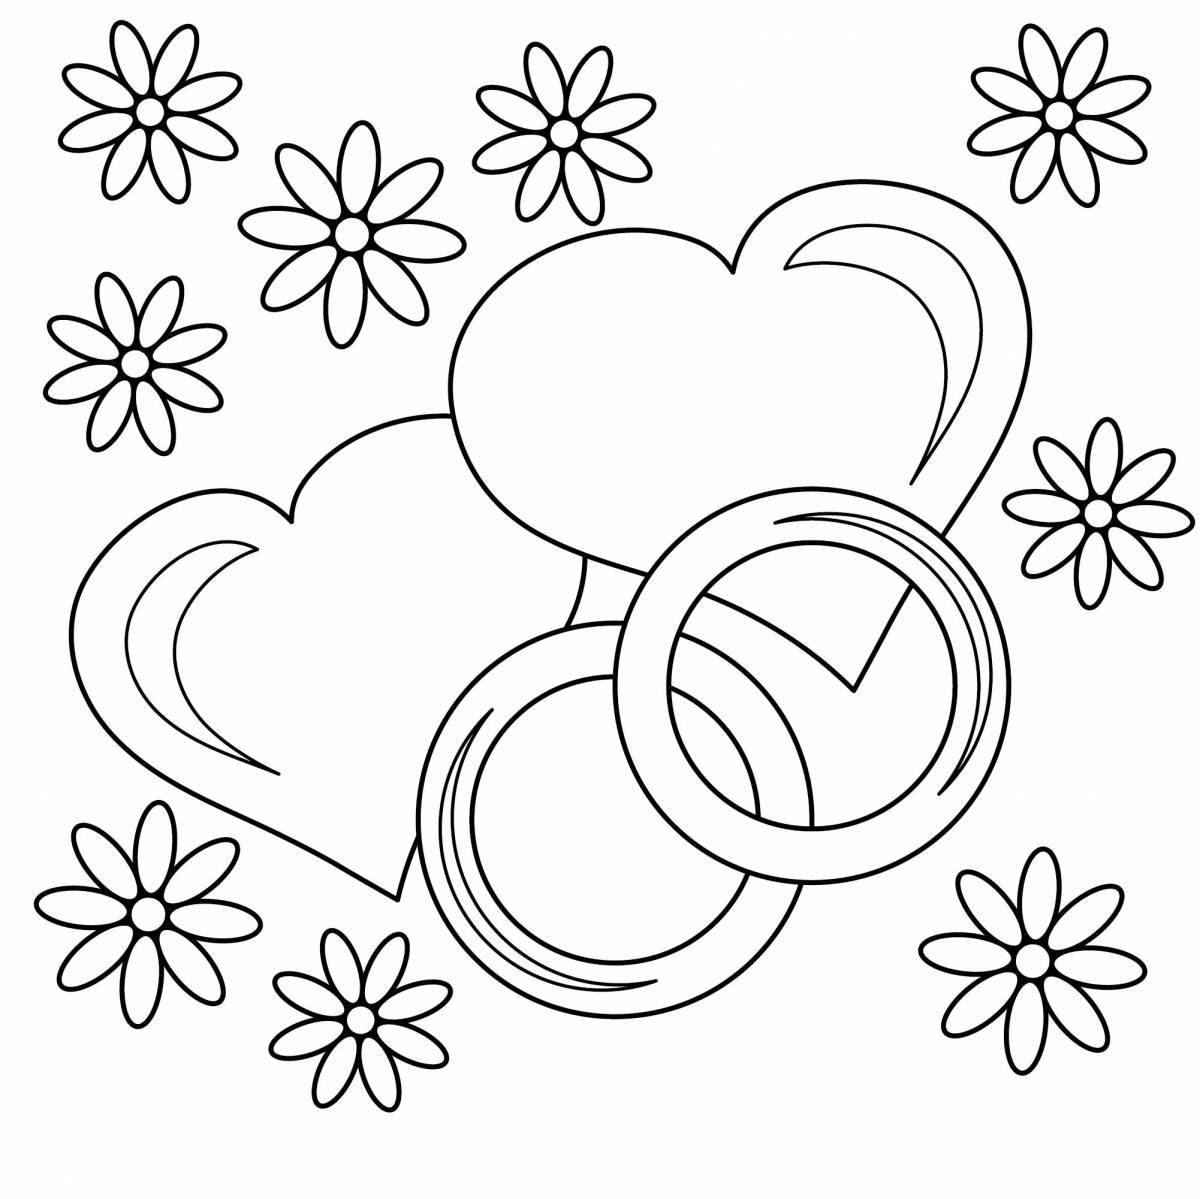 Awesome wedding ring coloring pages